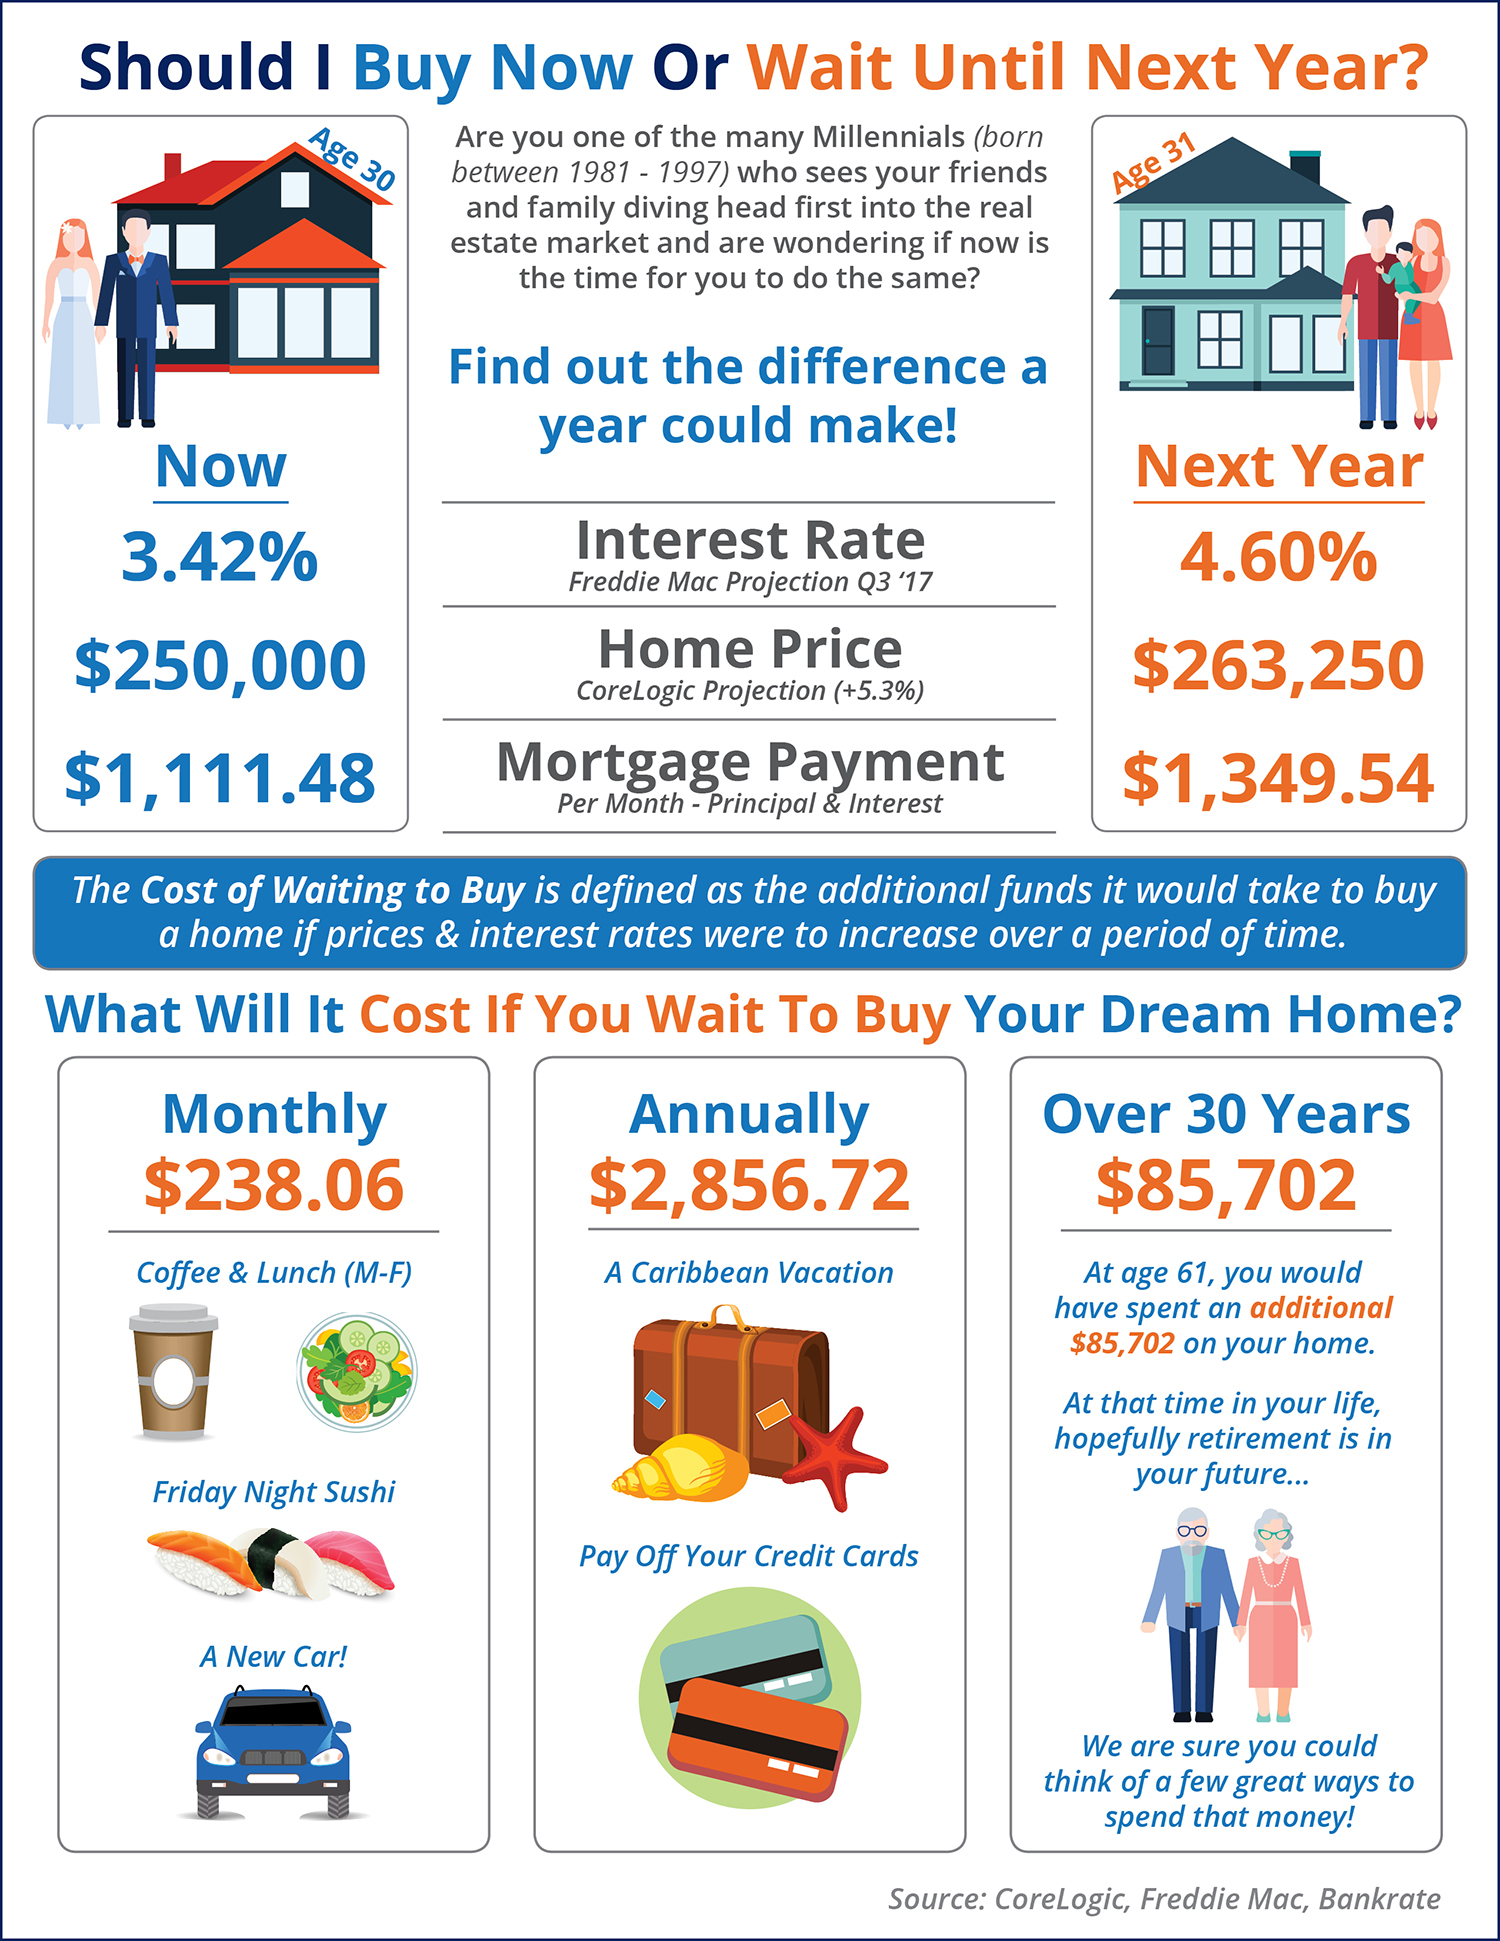 Should I Wait Until Next Year? Or Buy Now? [INFOGRAPHIC]